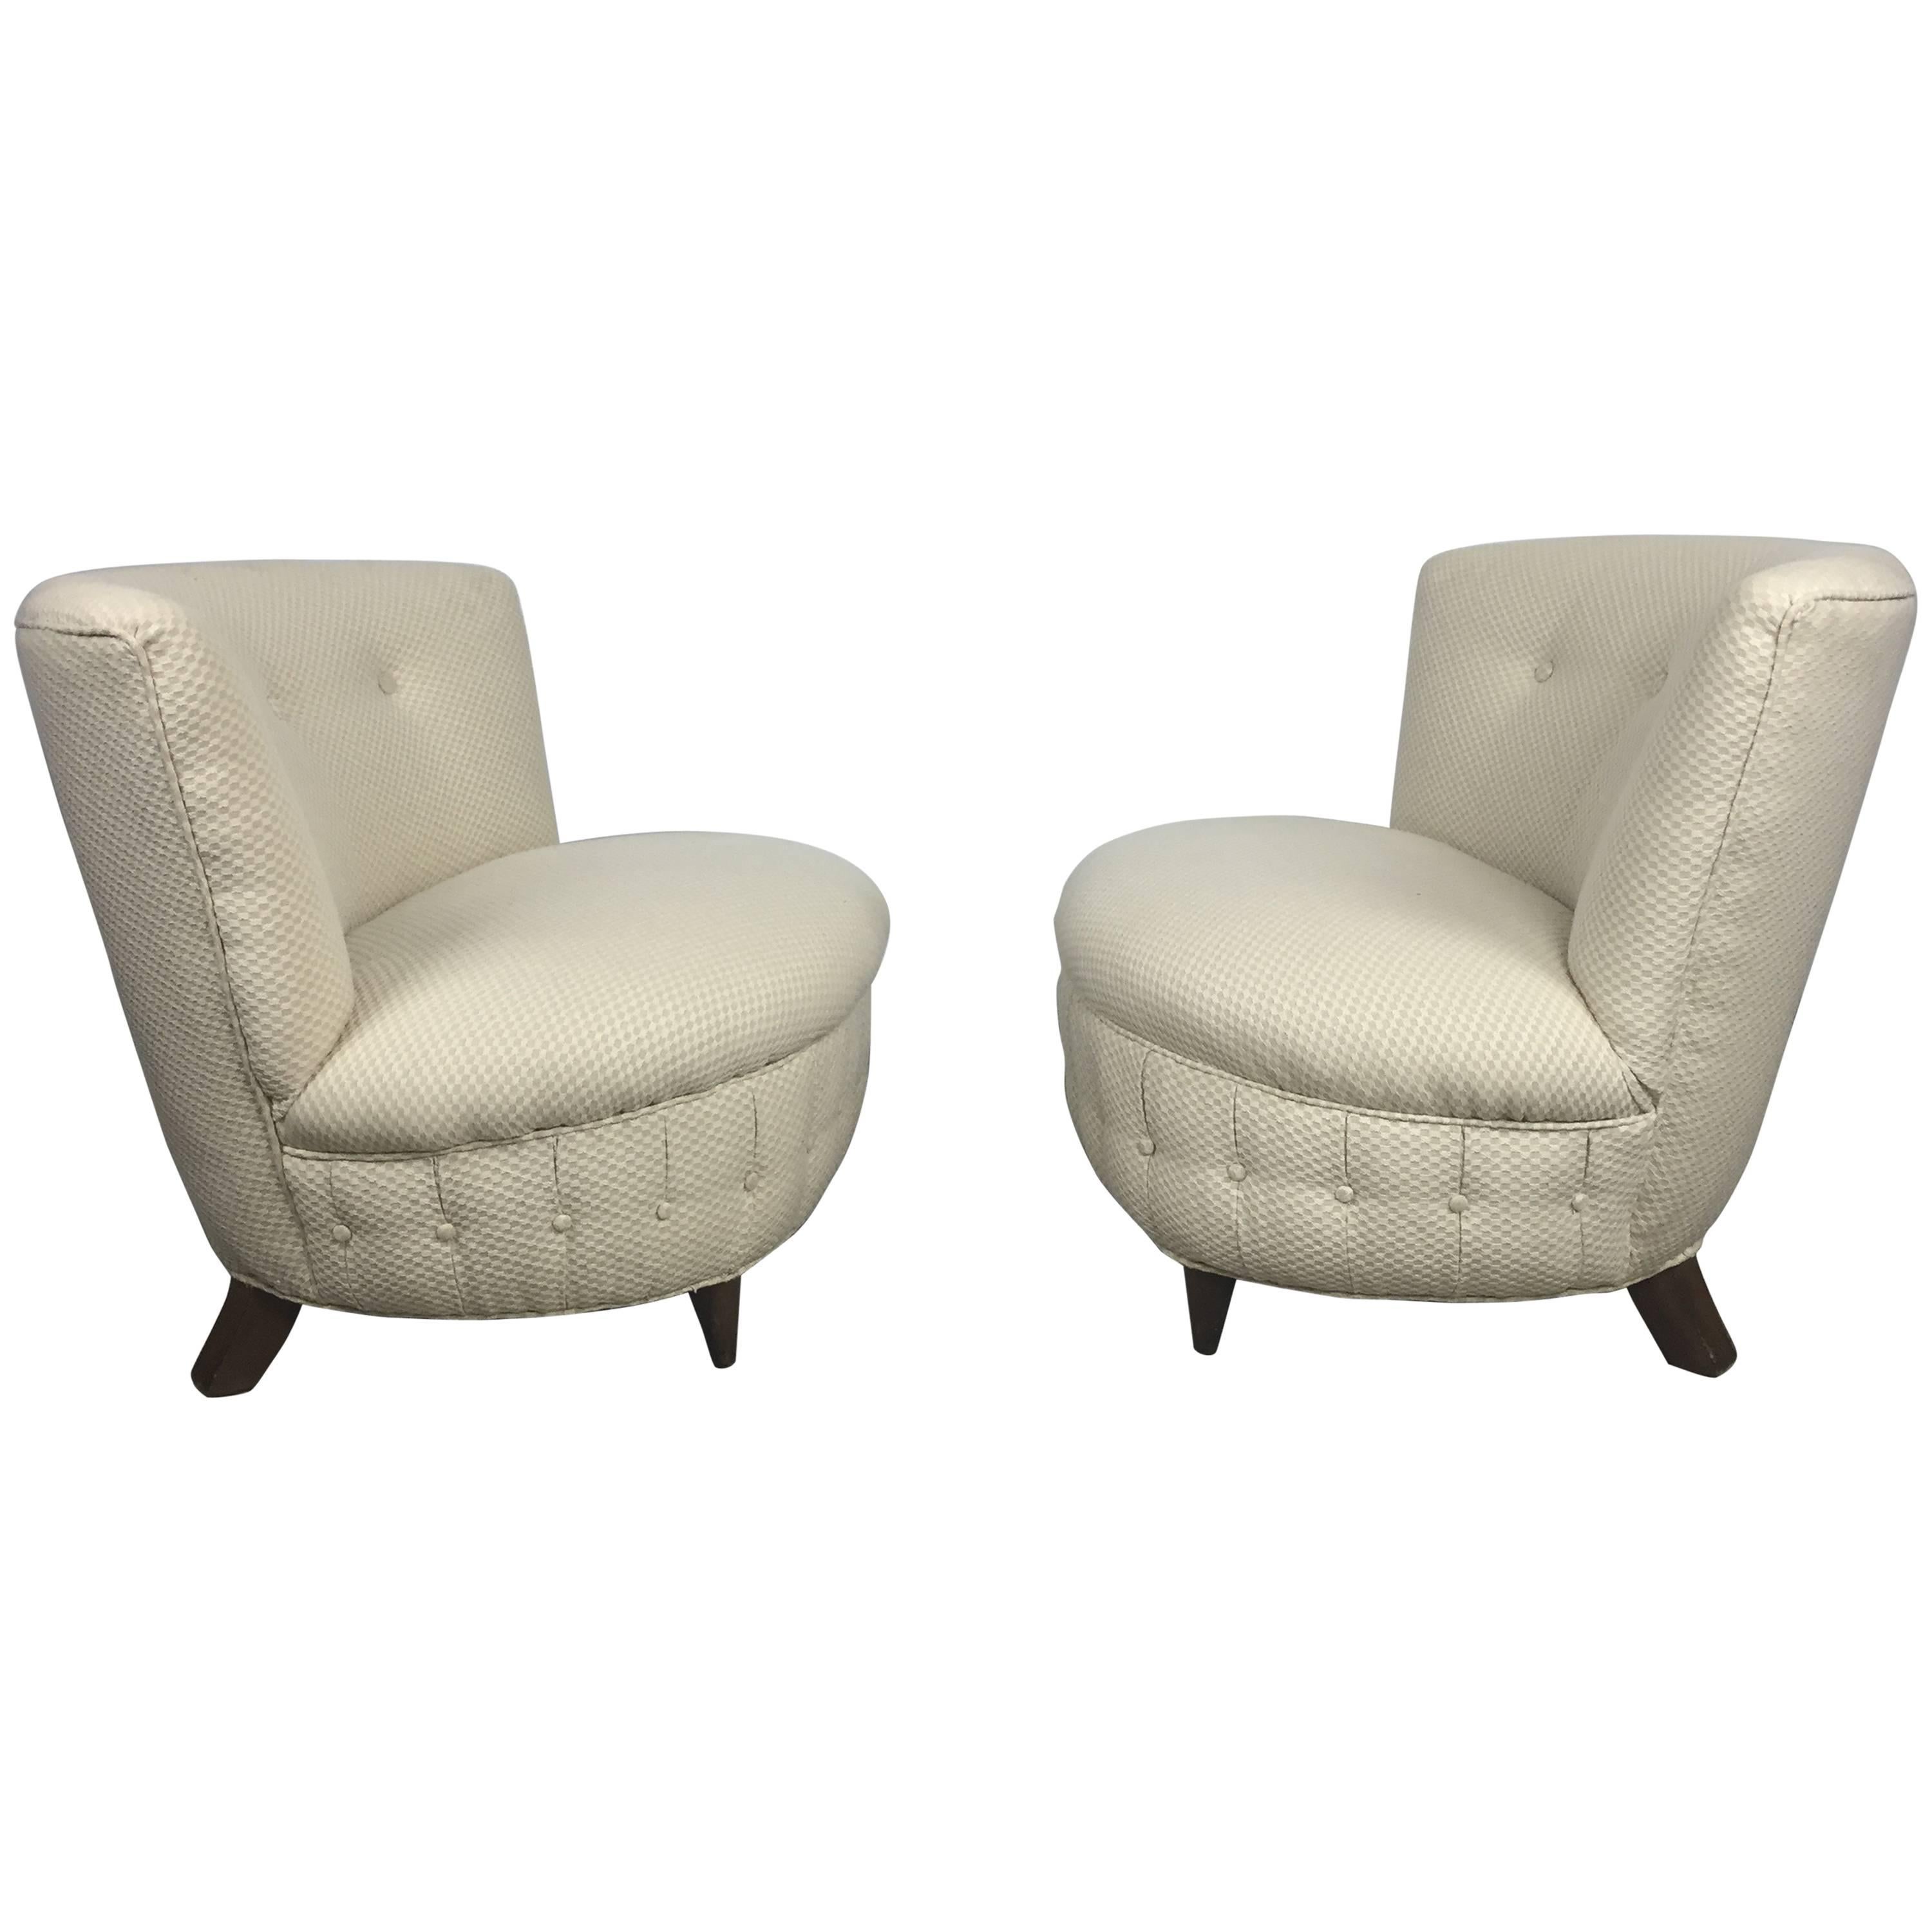 Pair of Button Tufted Slipper Chairs by Gilbert Rohde